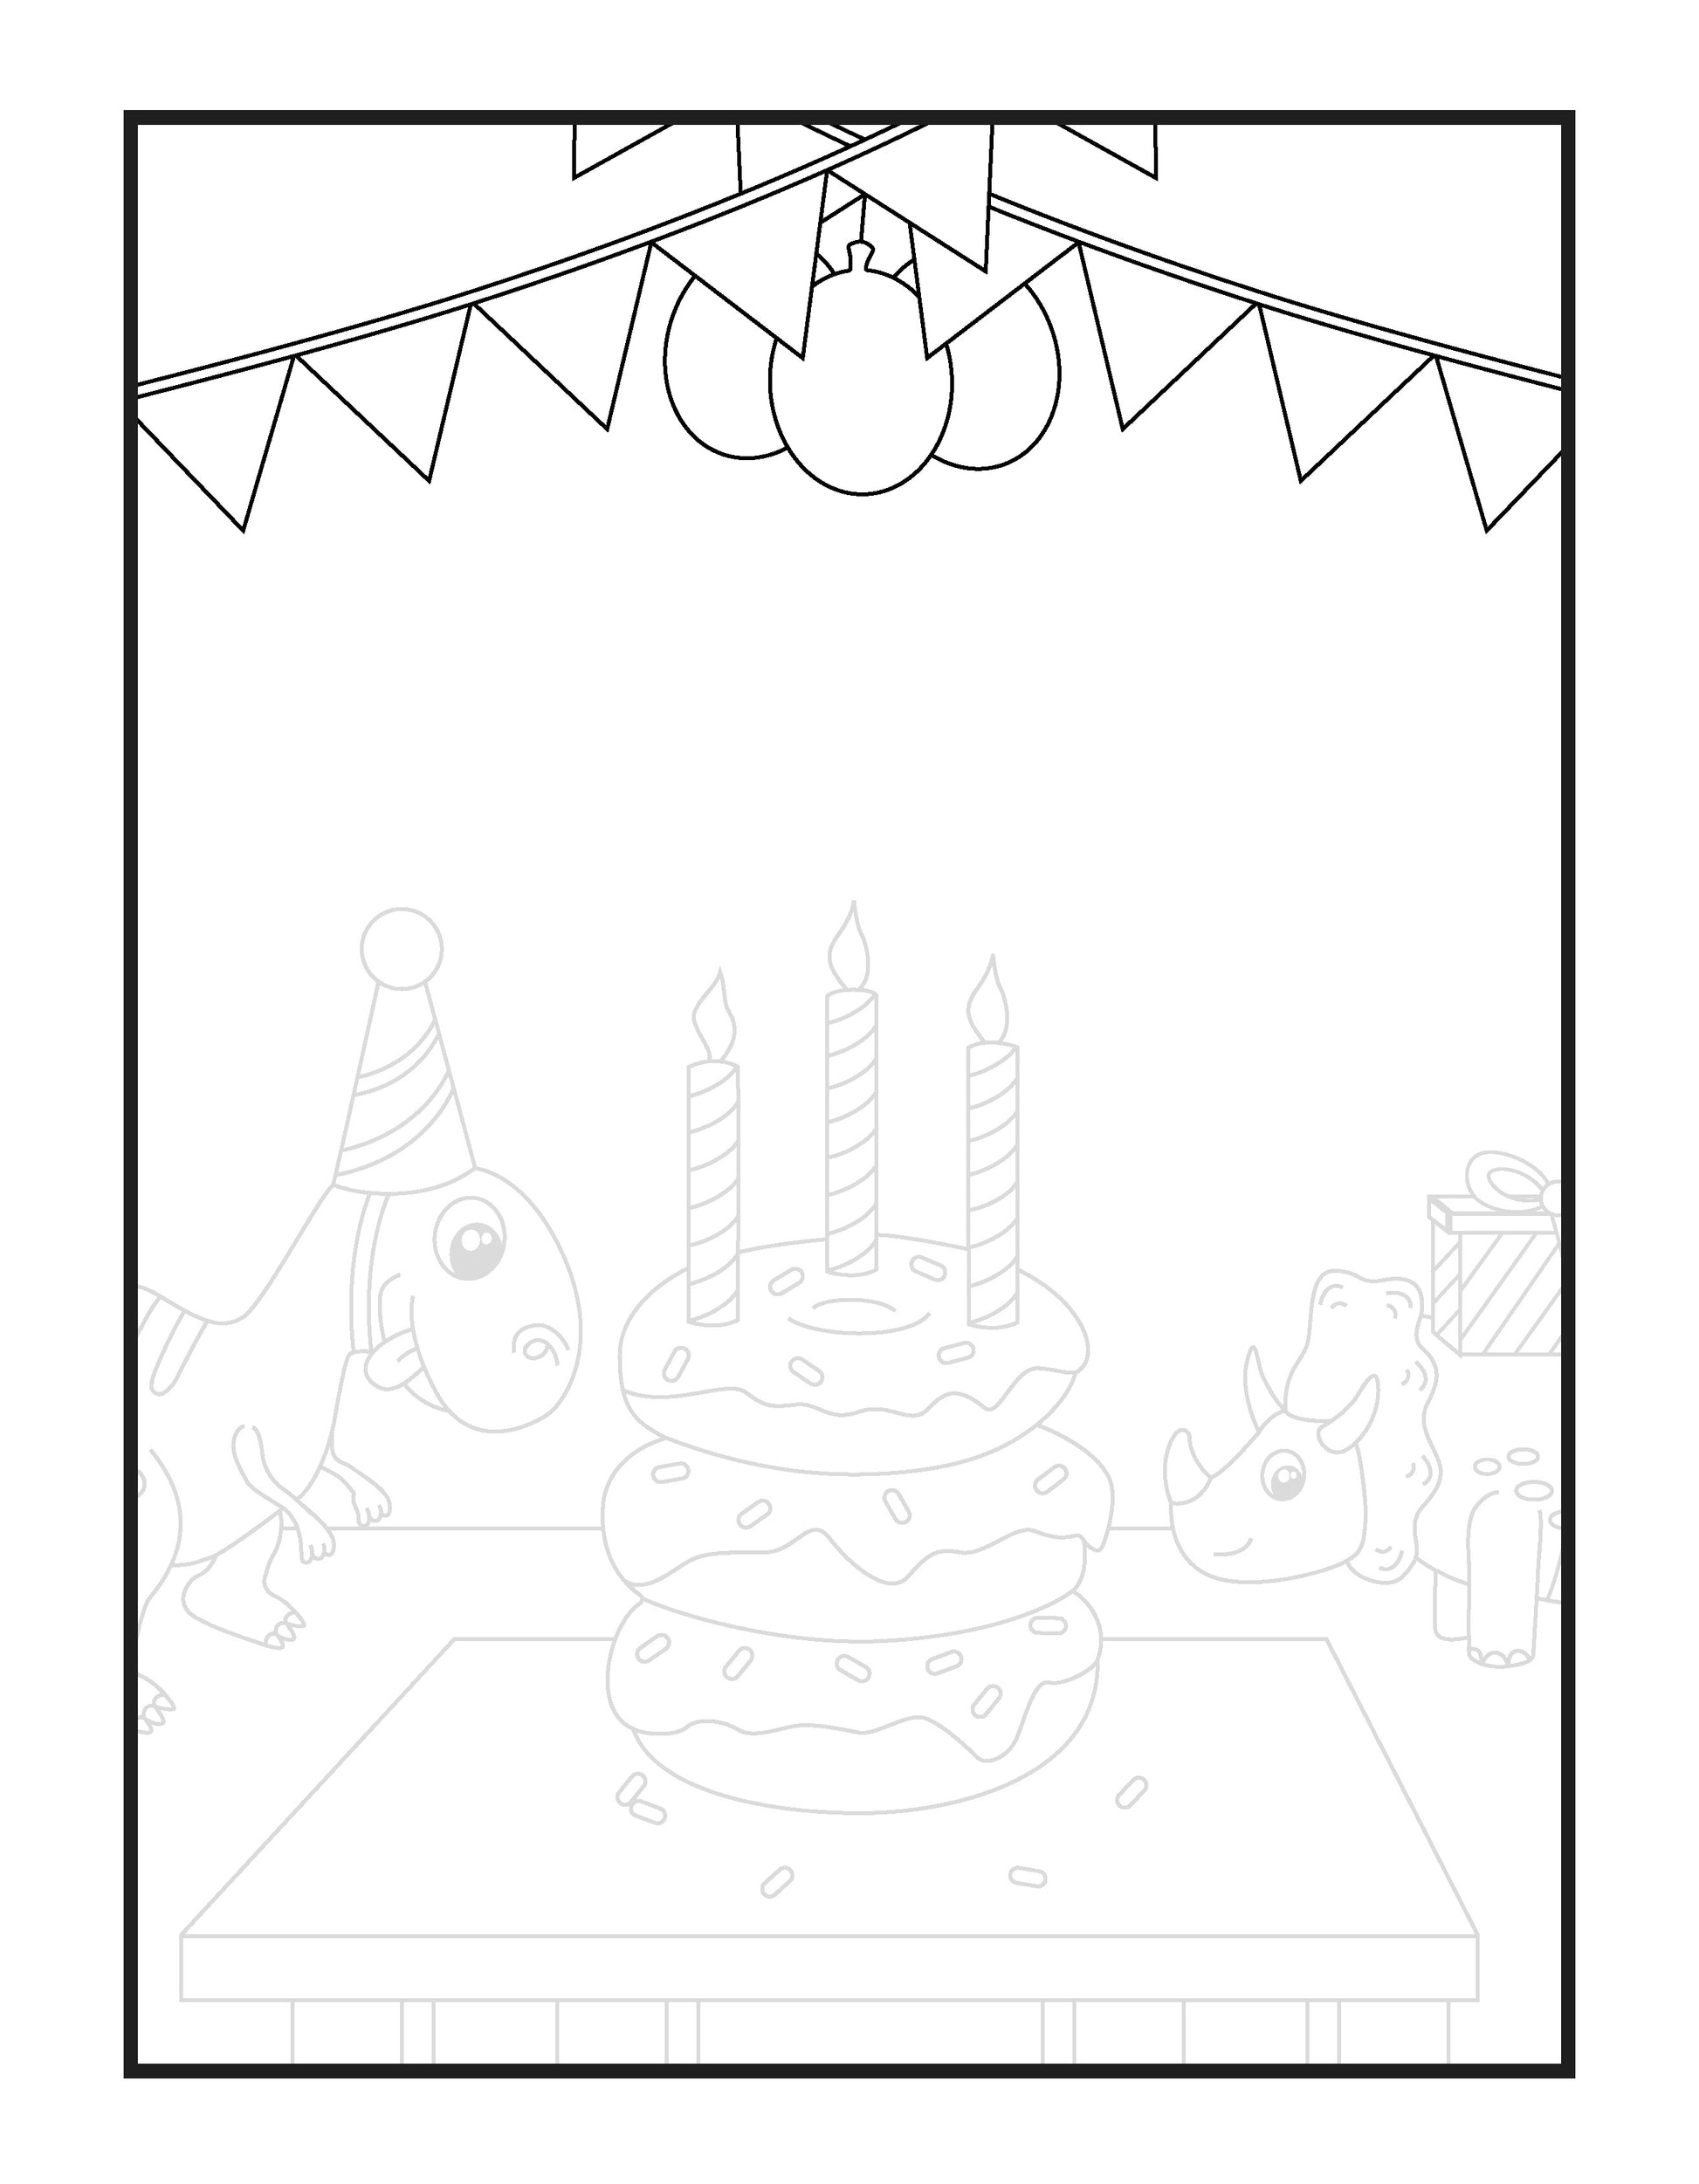  A coloring page depicting a birthday party shows a playful scene with cartoon dinosaurs celebrating. One dinosaur wearing a party hat is gazing at a large three-tiered cake with three lit candles on top, sitting on a table. Another smaller dinosaur with a happy expression is peeking from the other side of the table. Above them, a string of pennants and a large decorative light set the party mood. The background is blank, inviting kids to add their creative touch.